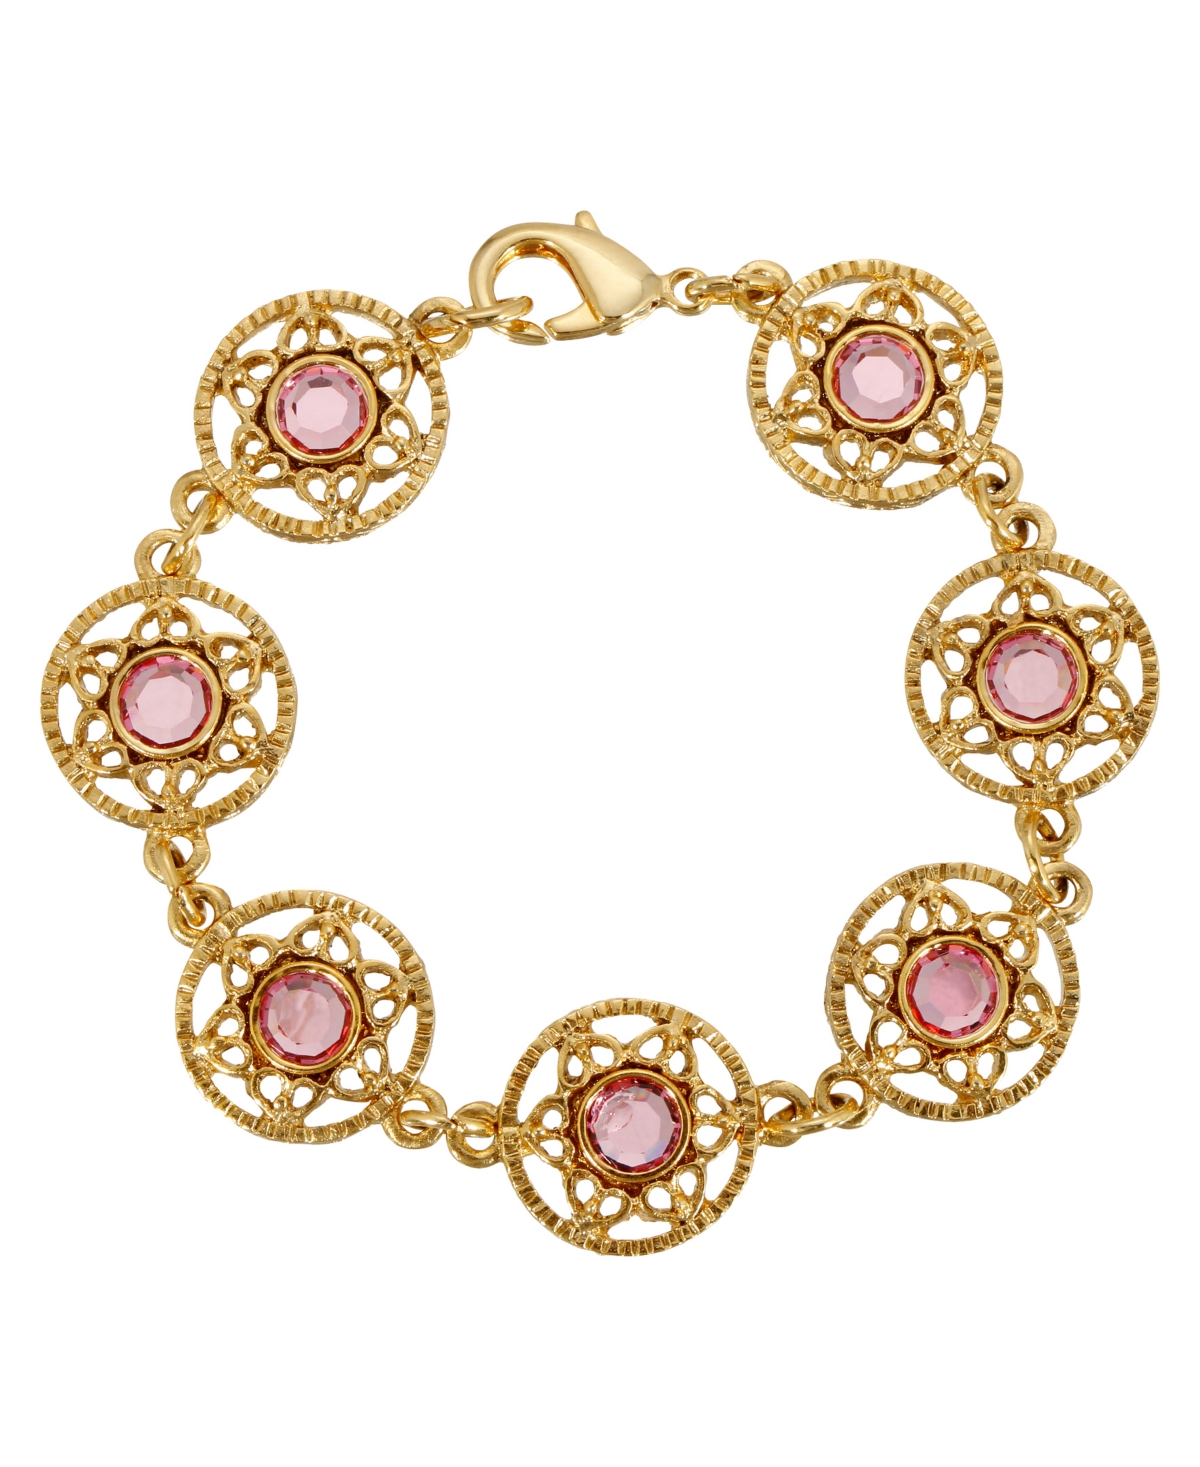 2028 Gold Tone Round Crystal Stone Bracelet In Pink